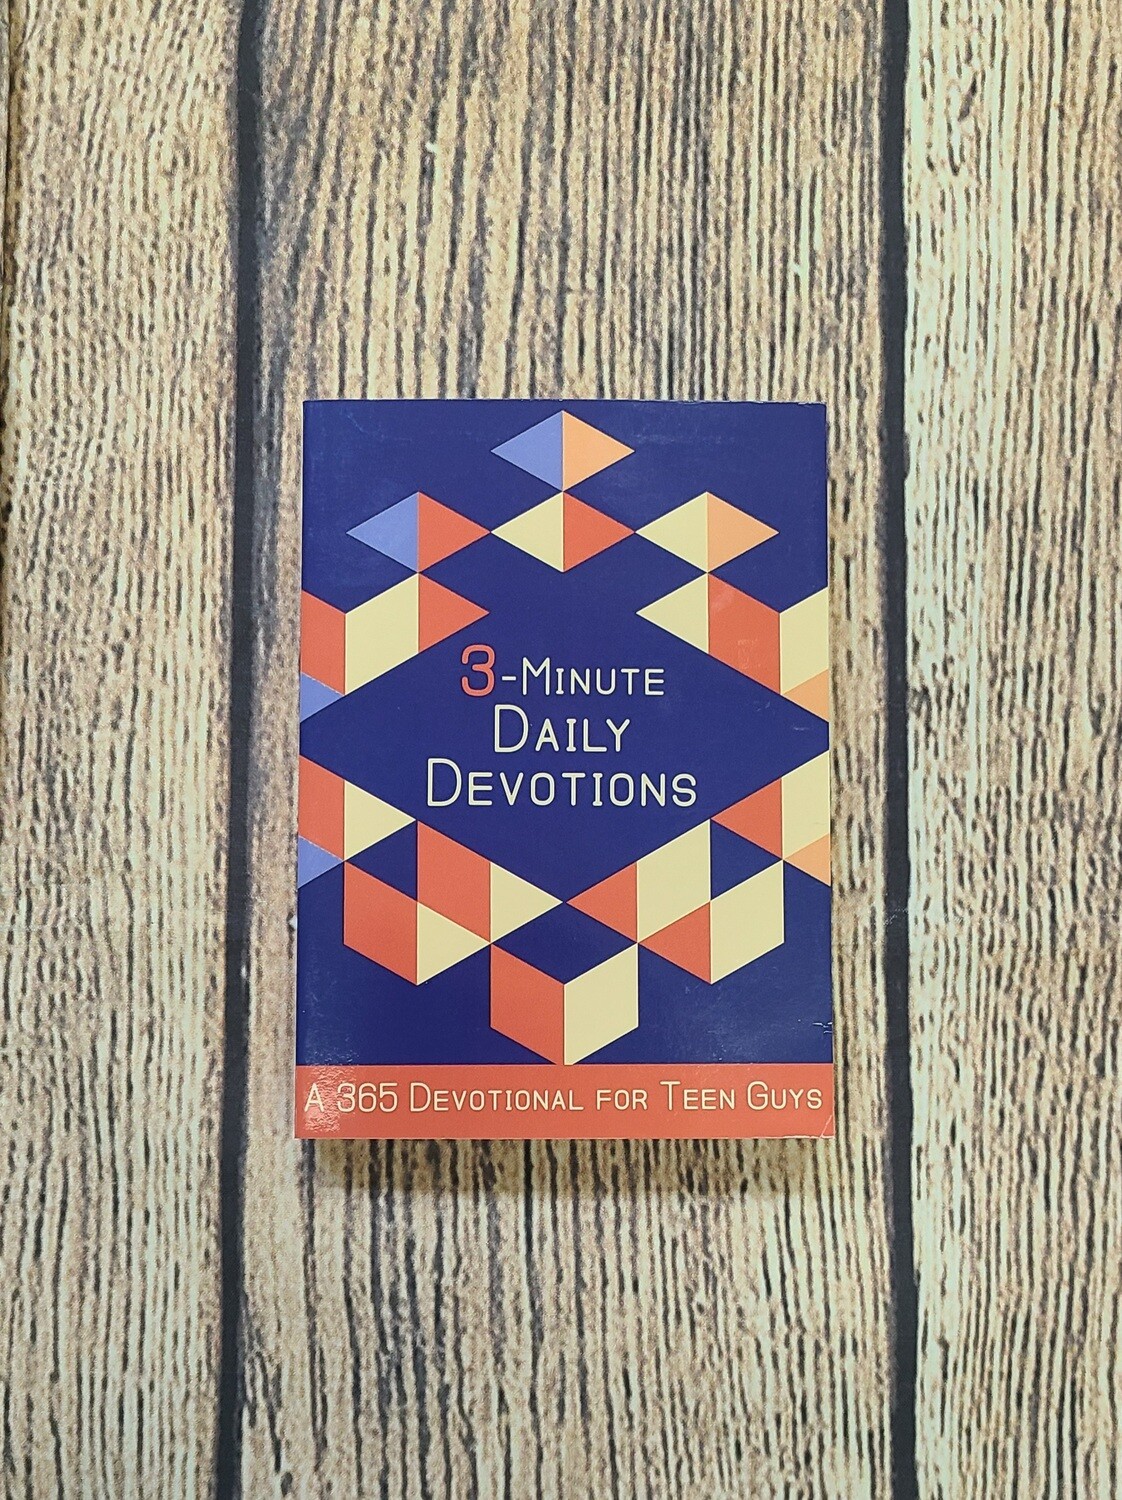 3-Minute 365 Daily Devotions for Teen Guys by Jesse Campbell